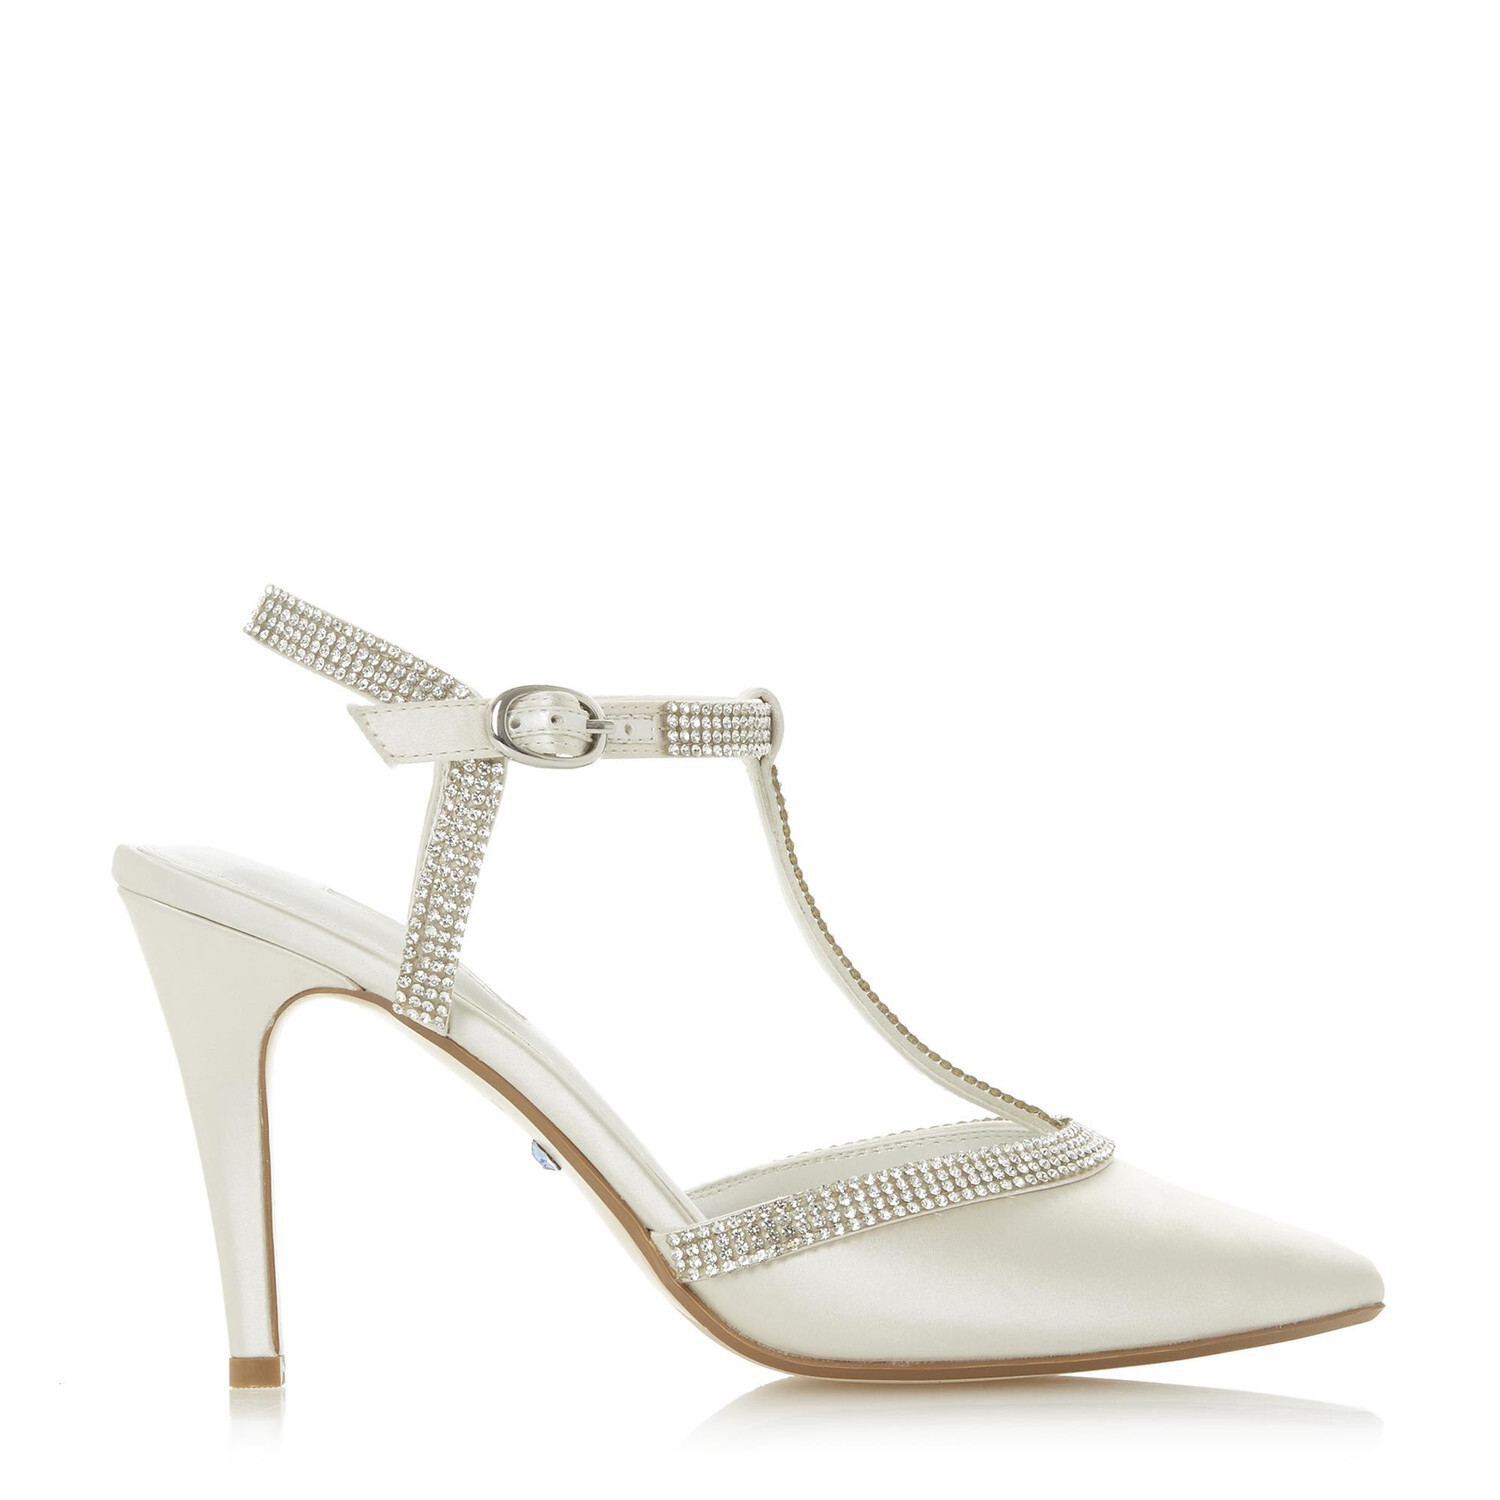 Delights Wedding Shoes from Dune London - hitched.co.uk